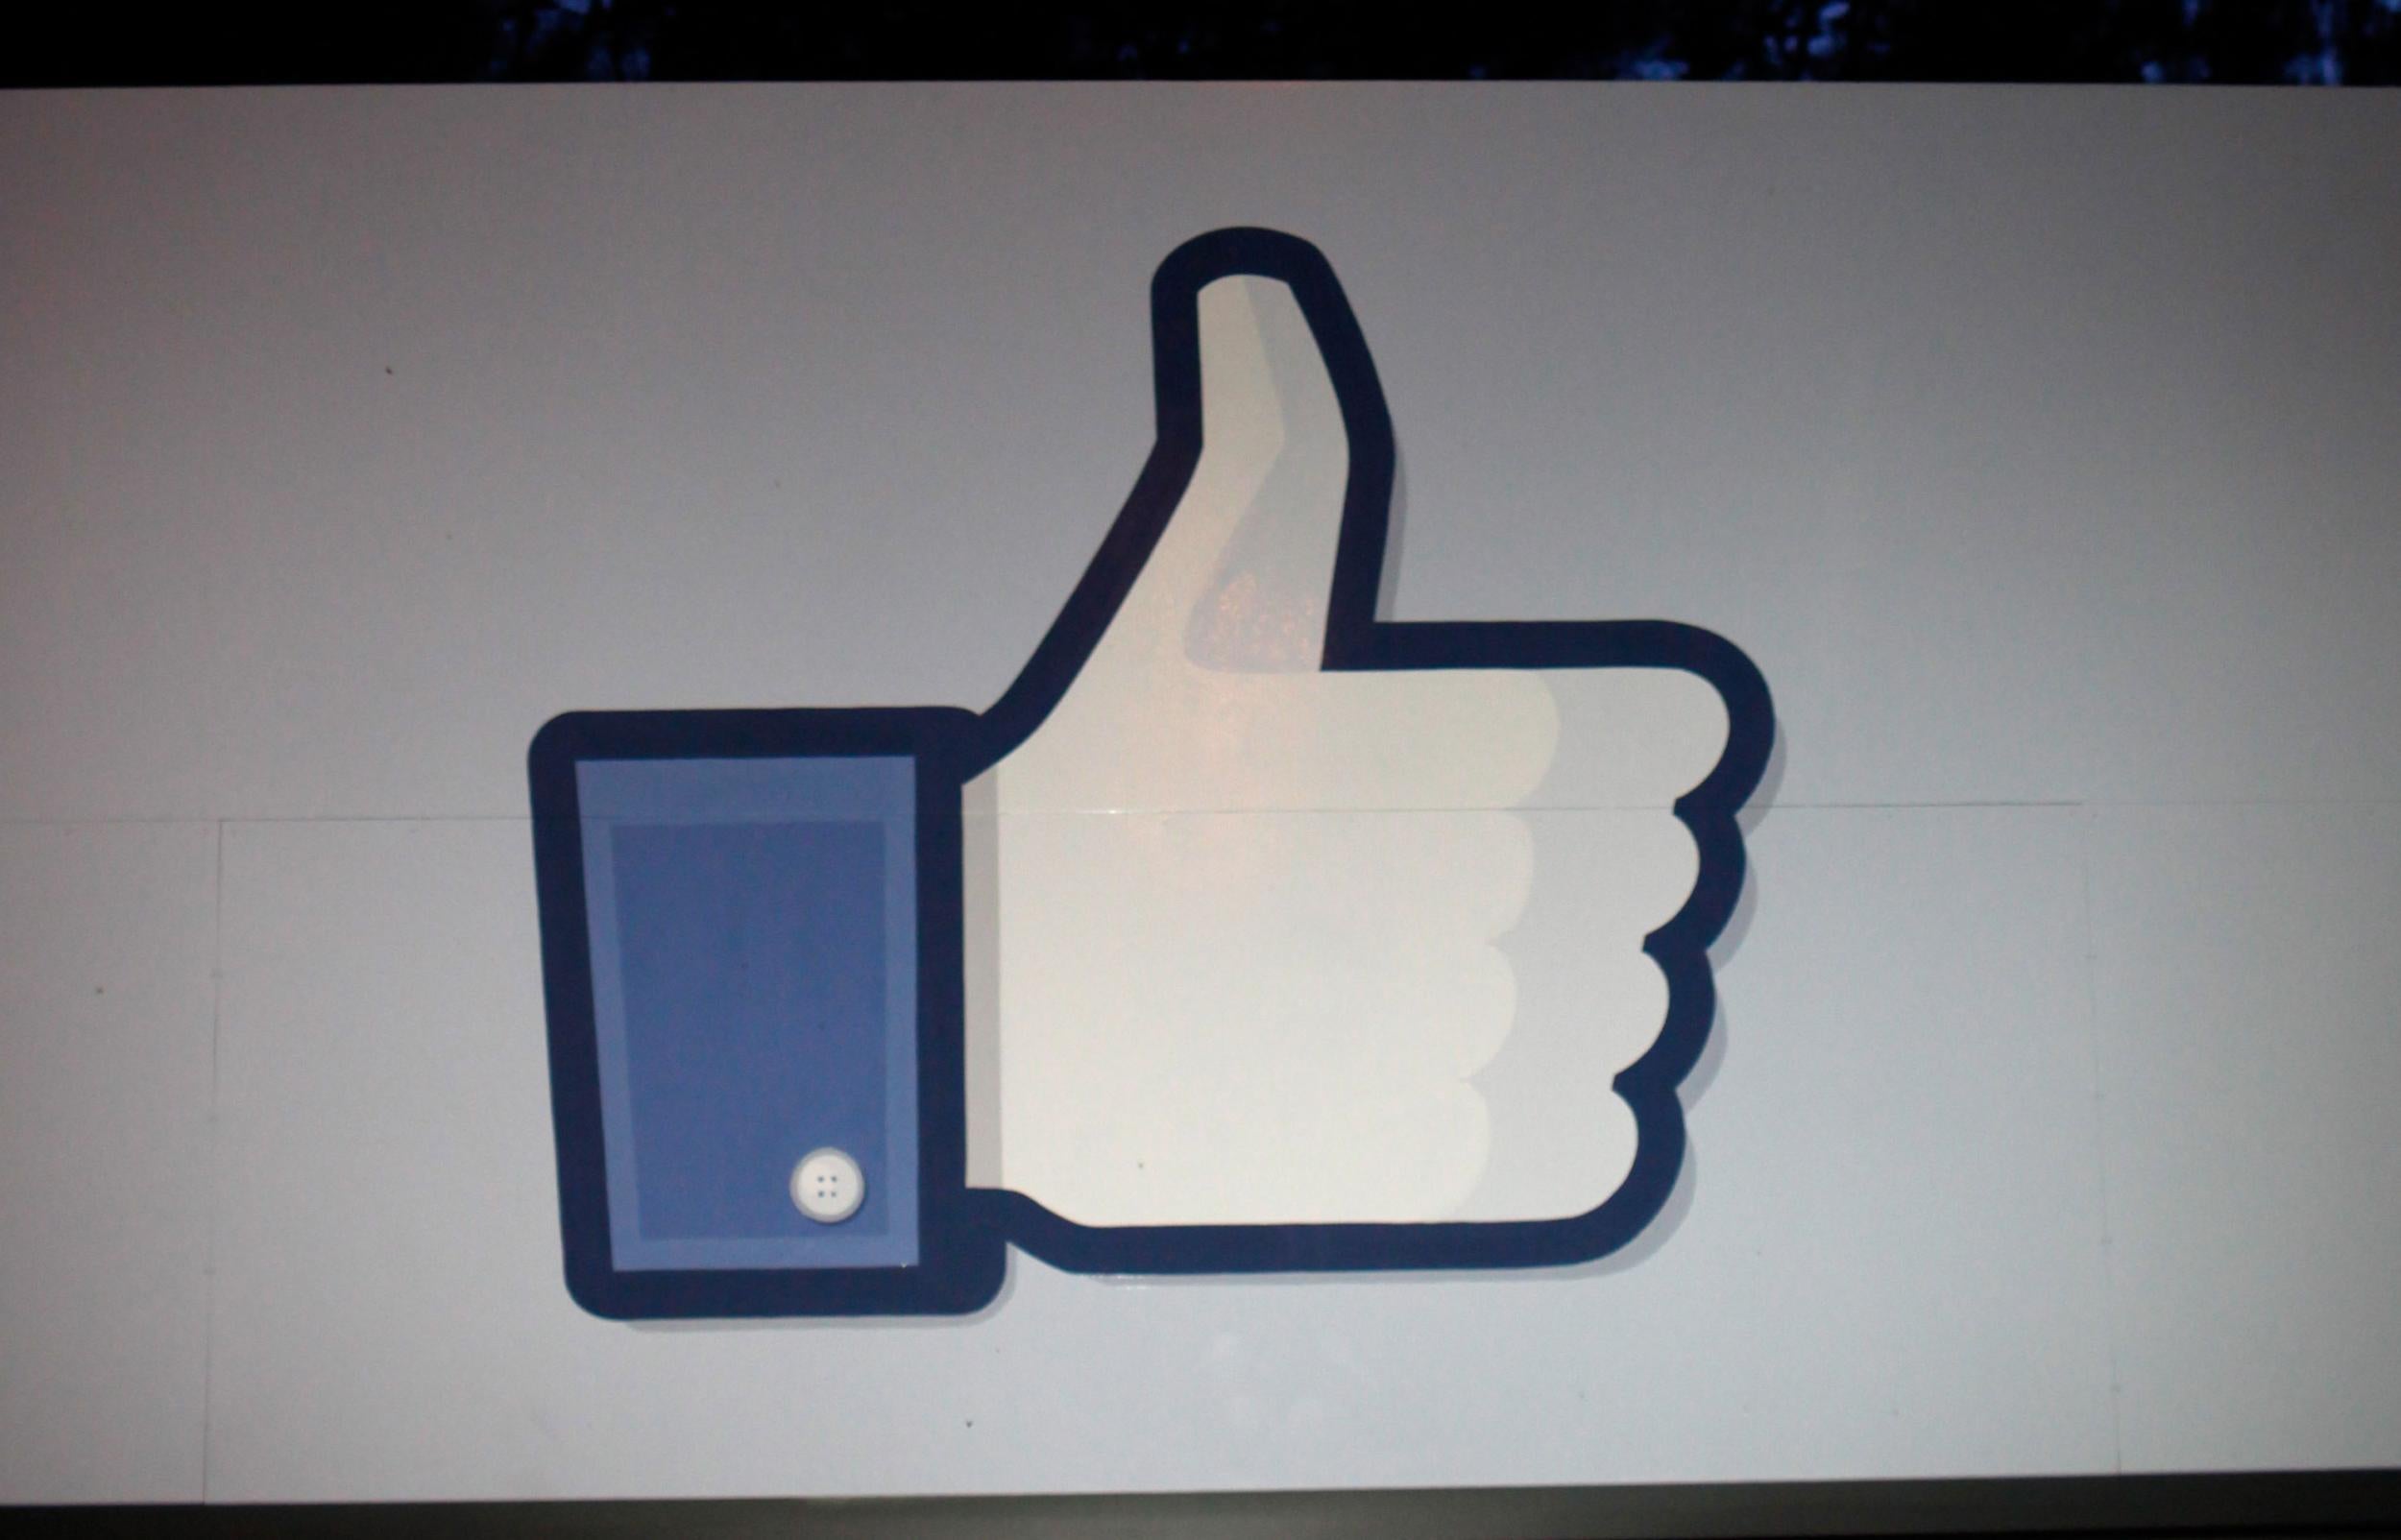 Facebook's overly-friendly greetings have been disturbing users